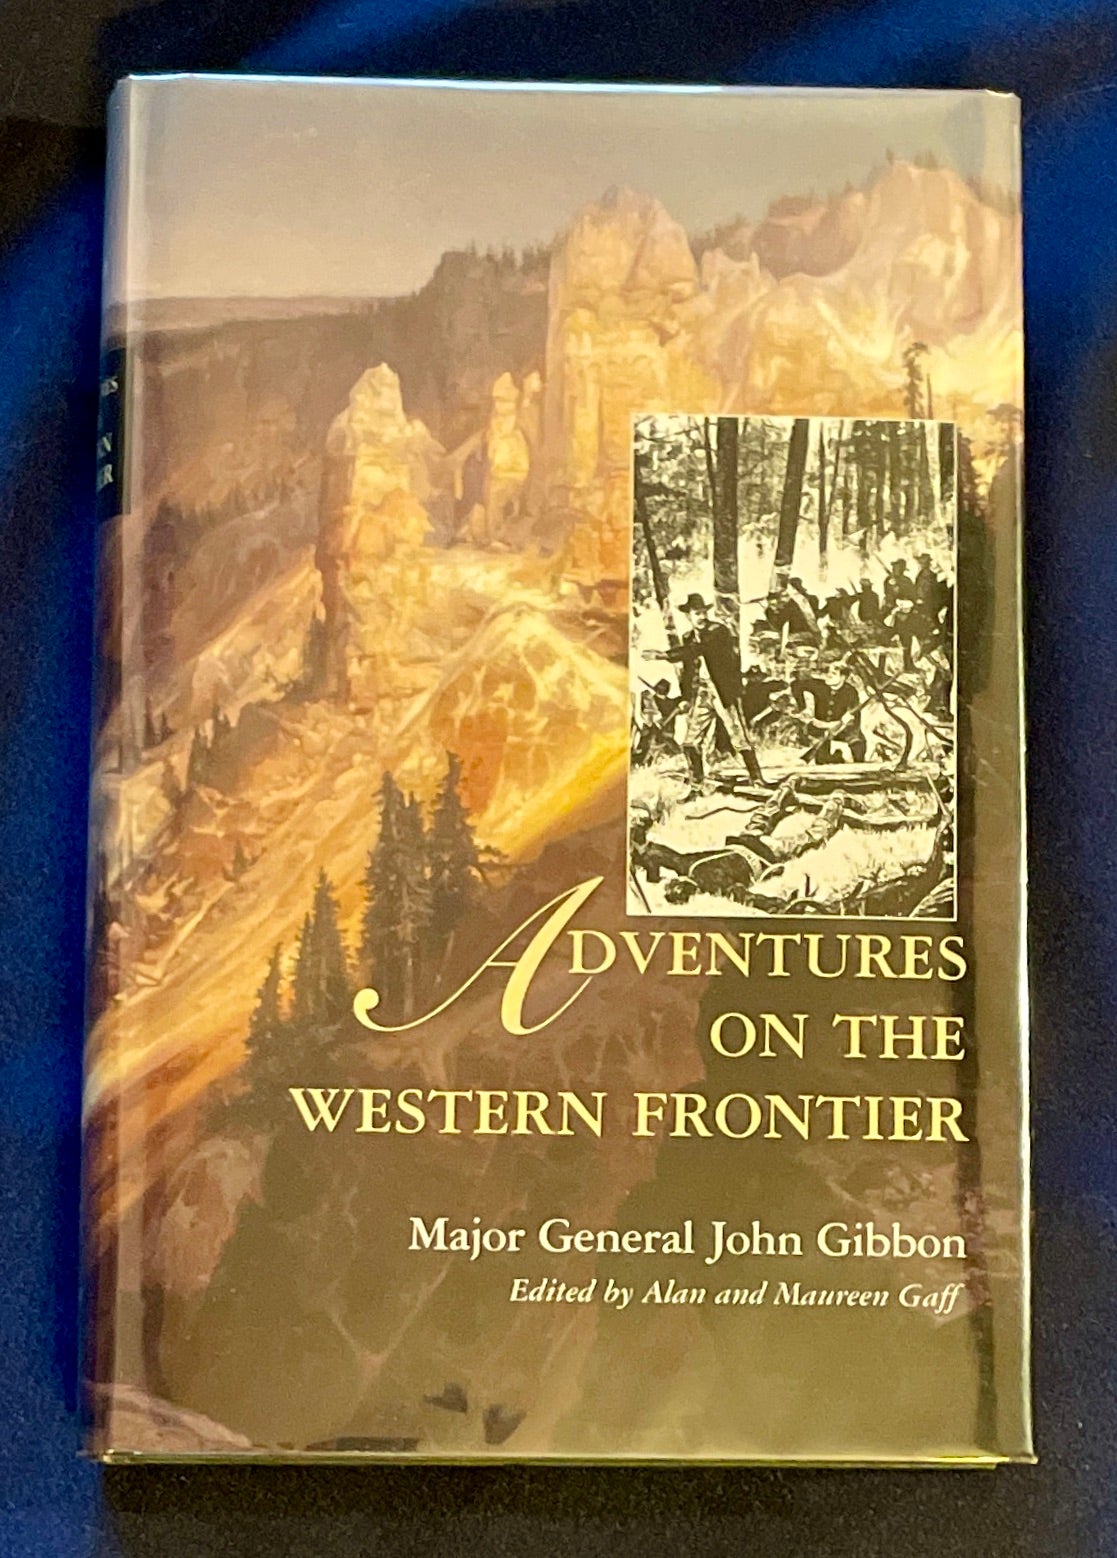 ADVENTURES ON THE WESTERN FRONTIER; By Major General John Gibbon / Edited  by Alan and Maureen Gaff by Major General John Gibbon on Borg Antiquarian